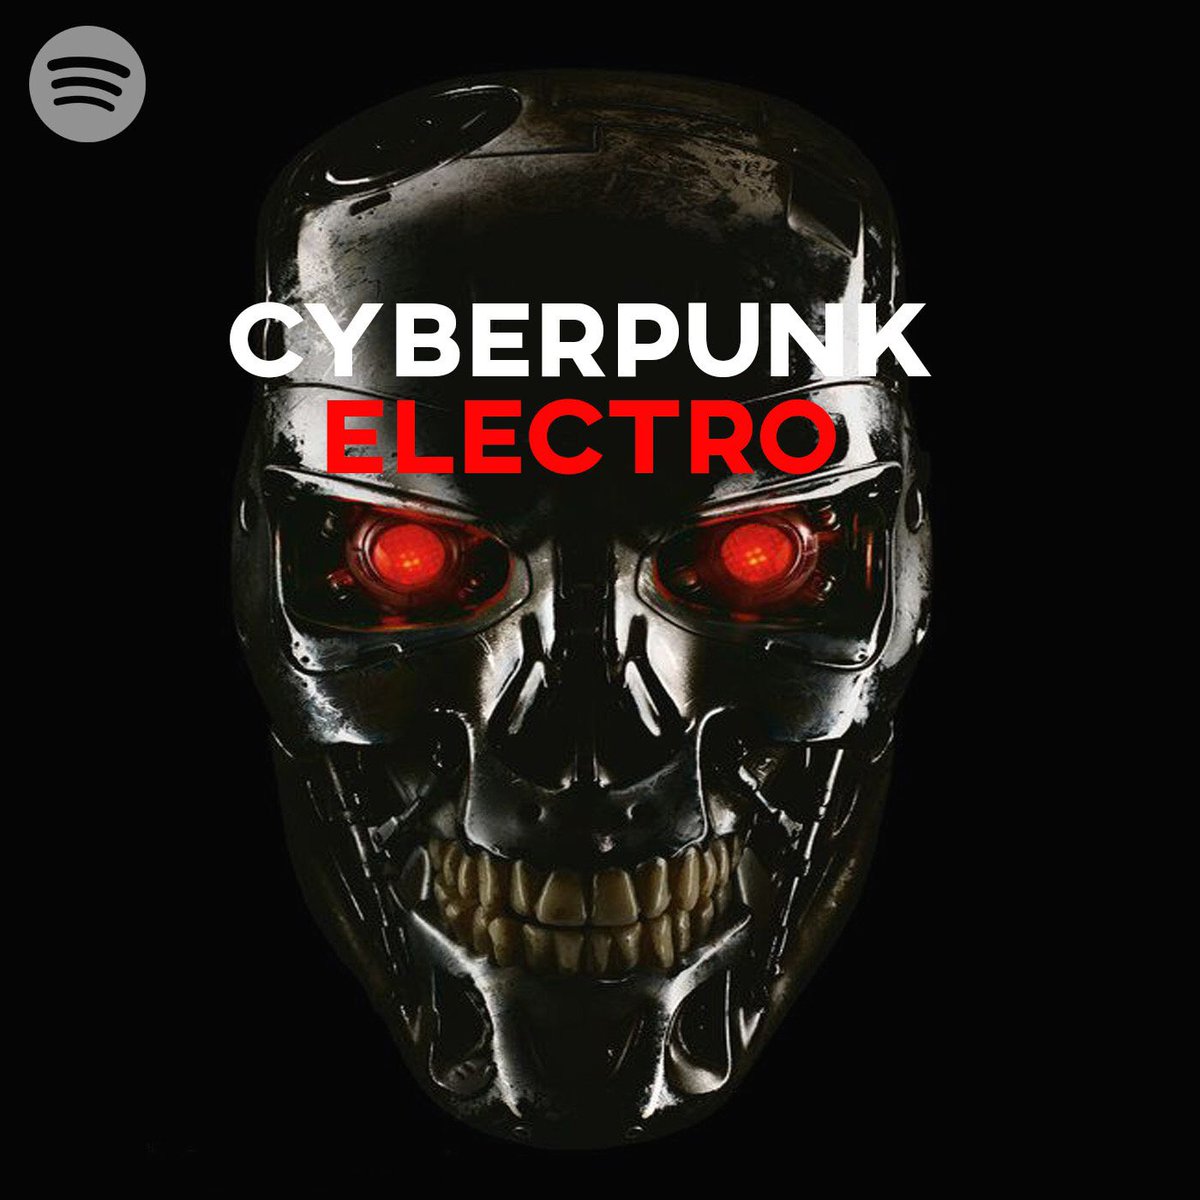 Although I don’t make Wolftron music anymore, I still make #spotifyplaylists and I like to build a new following for this one! Please give this Cyberpunk Mix a follow and listen. Much Love🖤 open.spotify.com/playlist/46oHf…